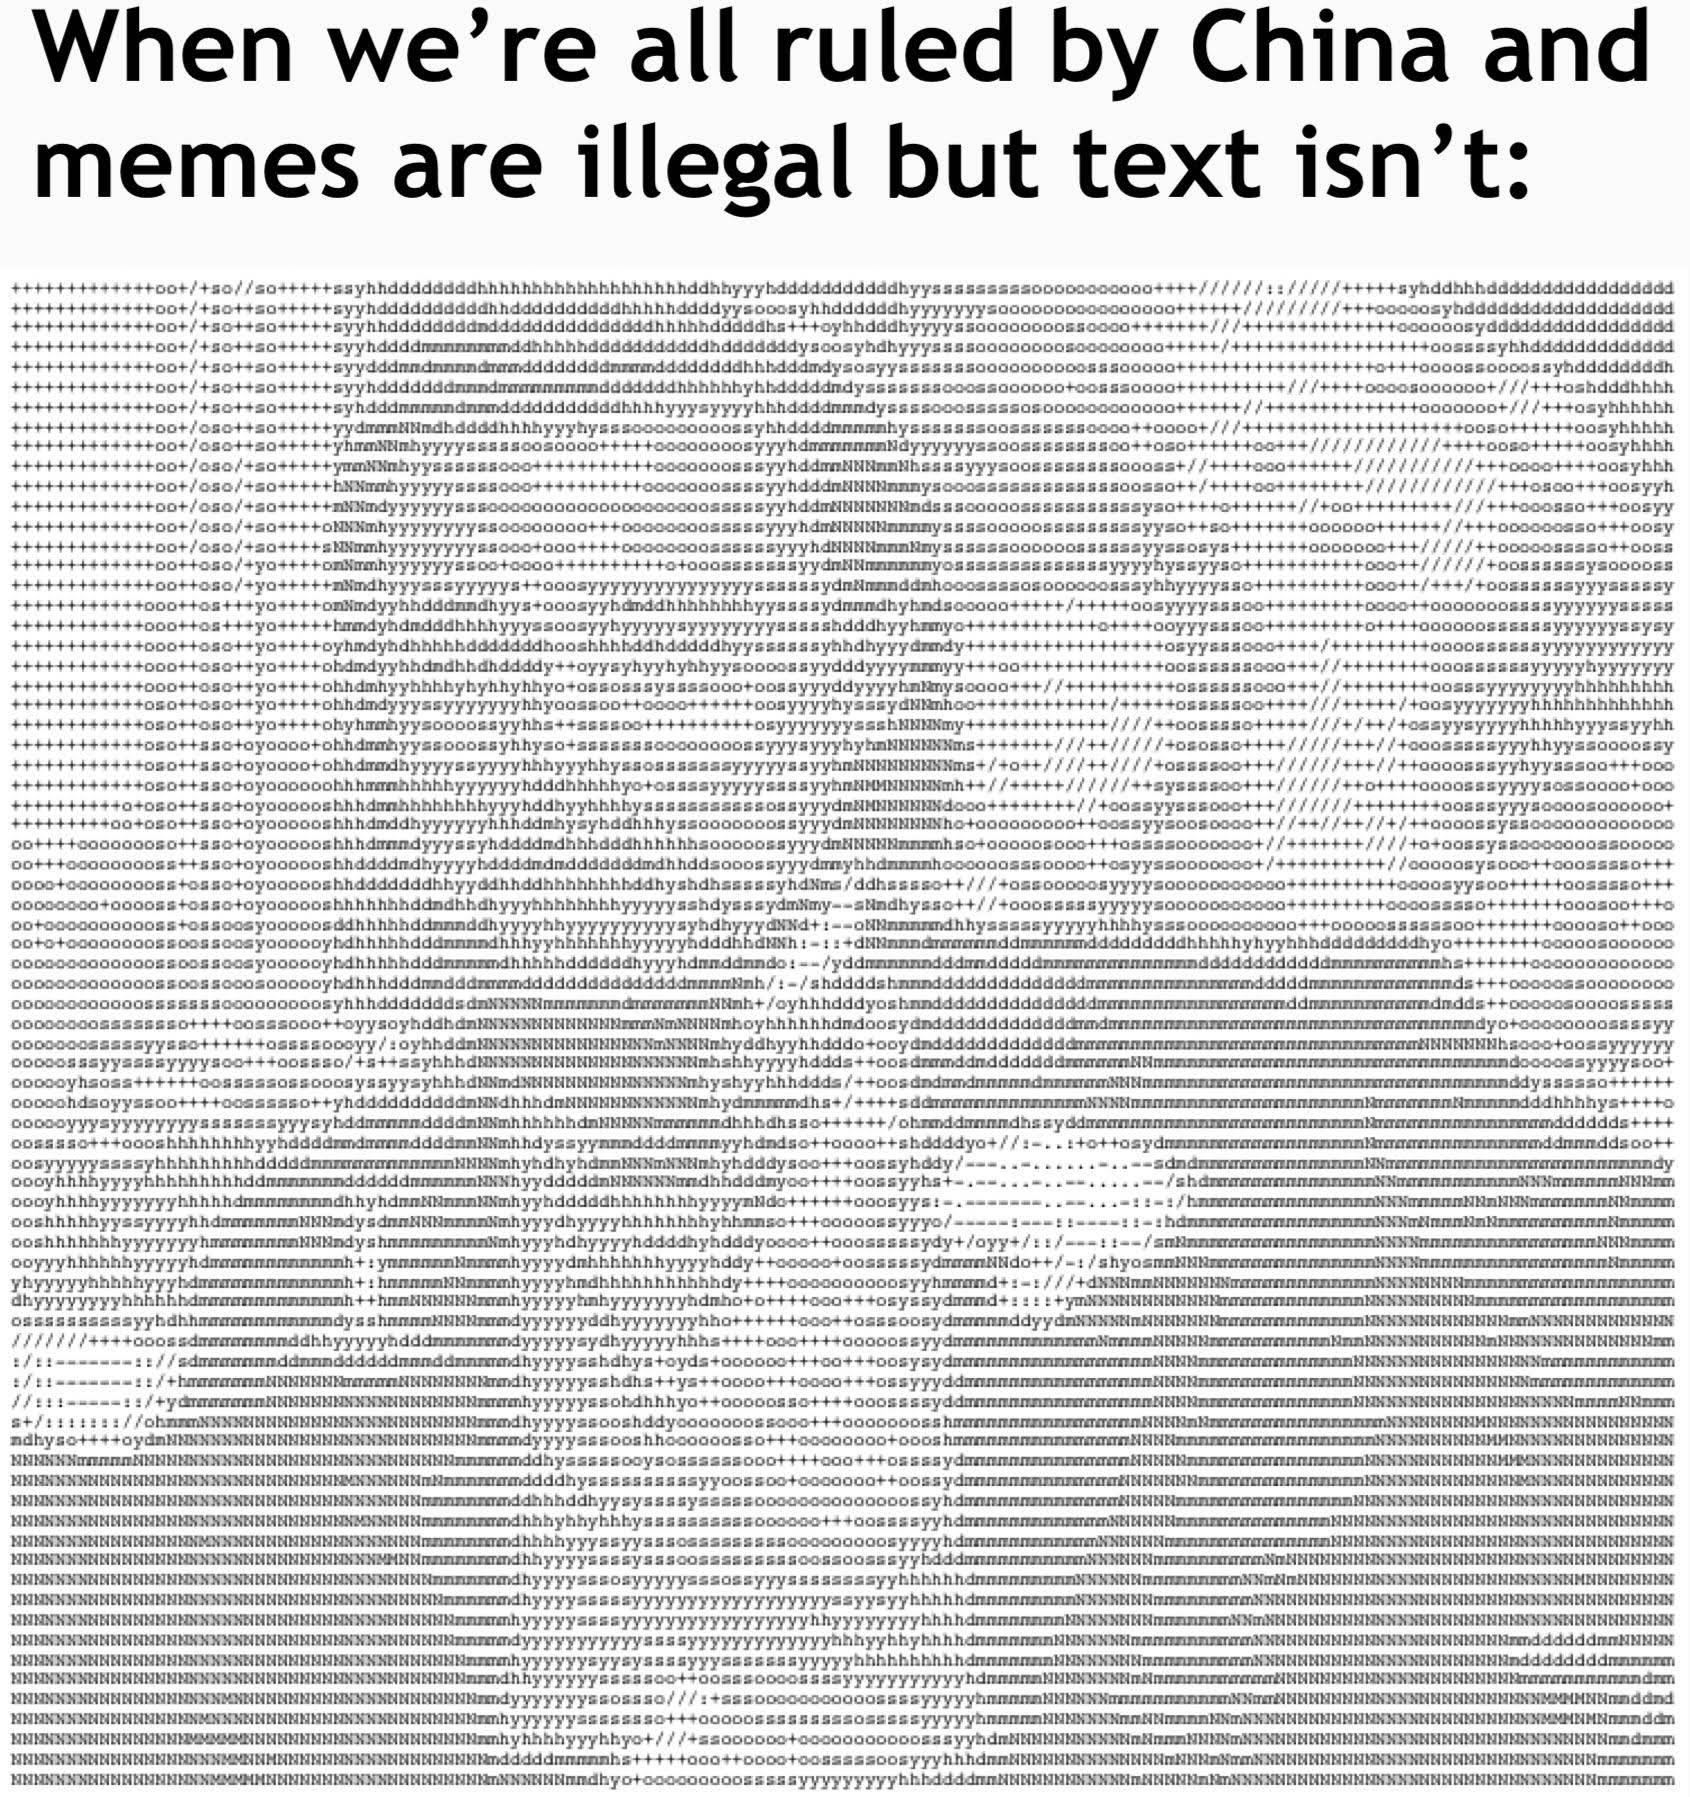 pattern - When we're all ruled by China and memes are illegal but text isn't